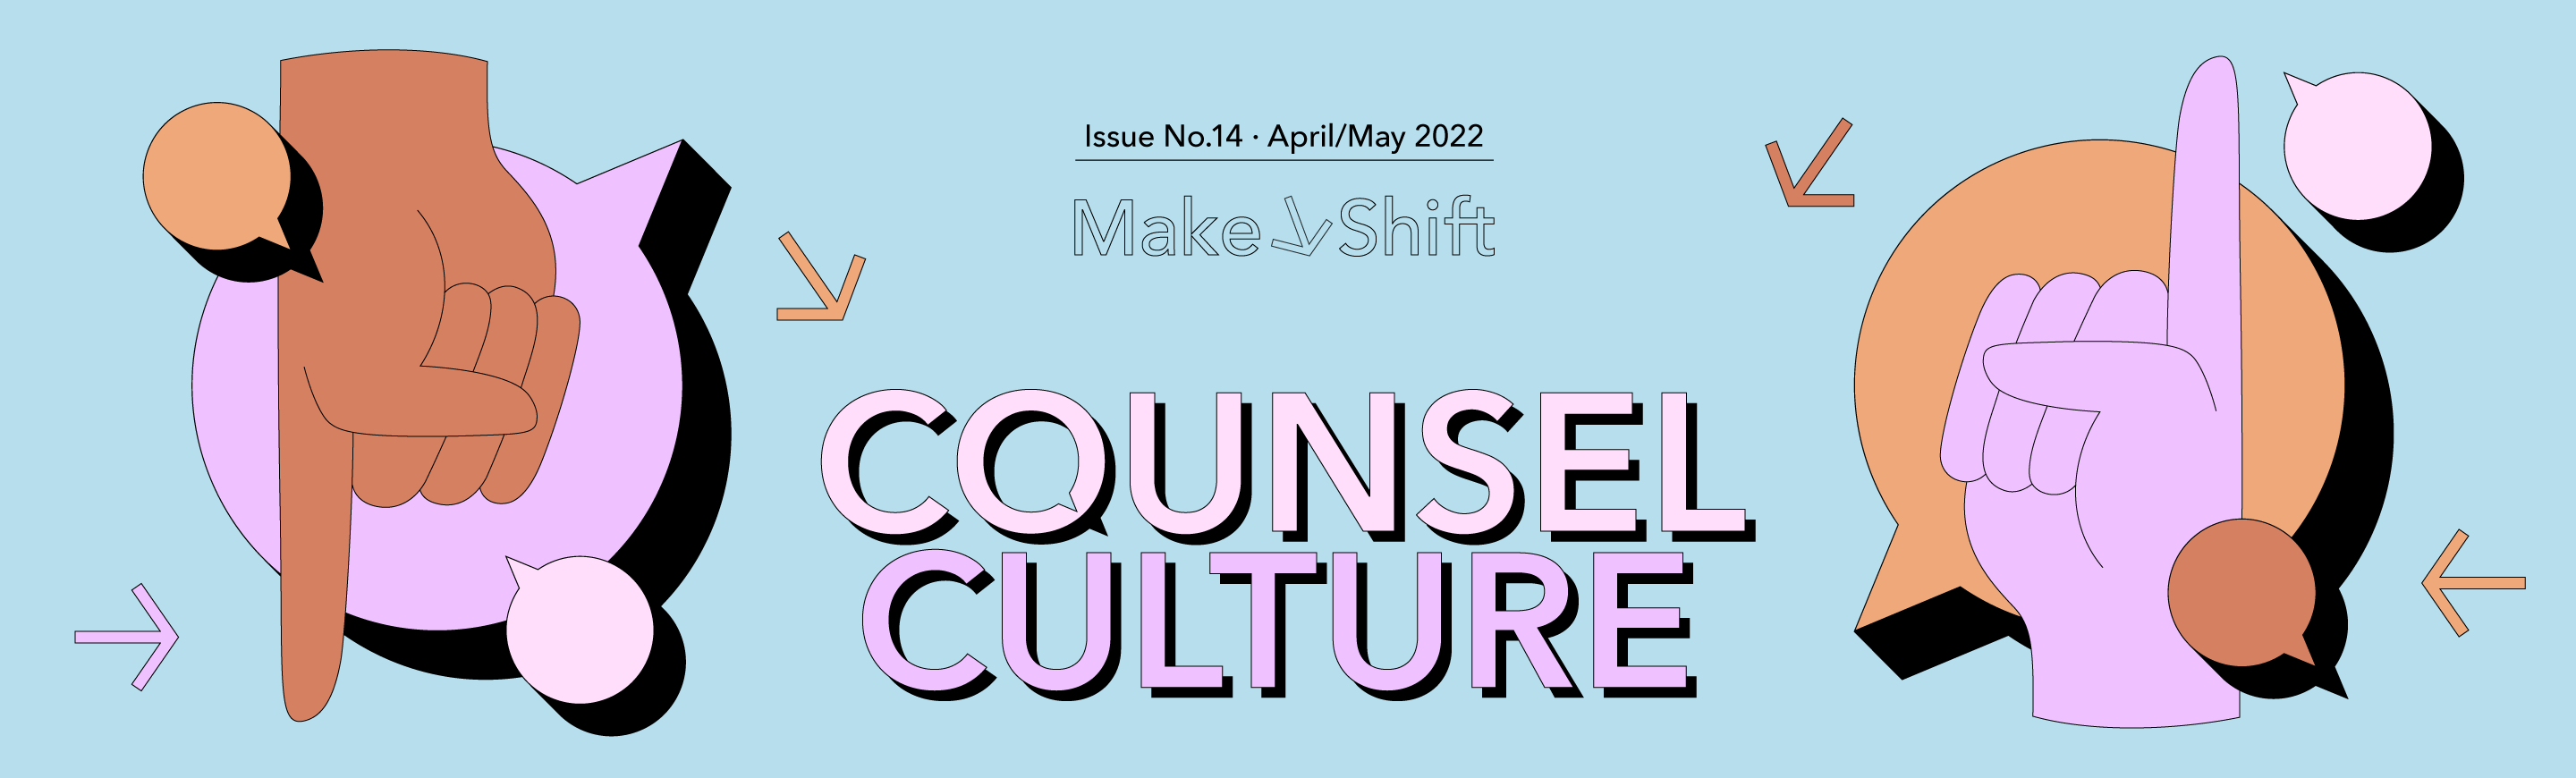 This is the April/May issue of MakeShift, called Counsel Culture. Cartoon graphic showing chat bubbles with fingers in them pointing up and down.